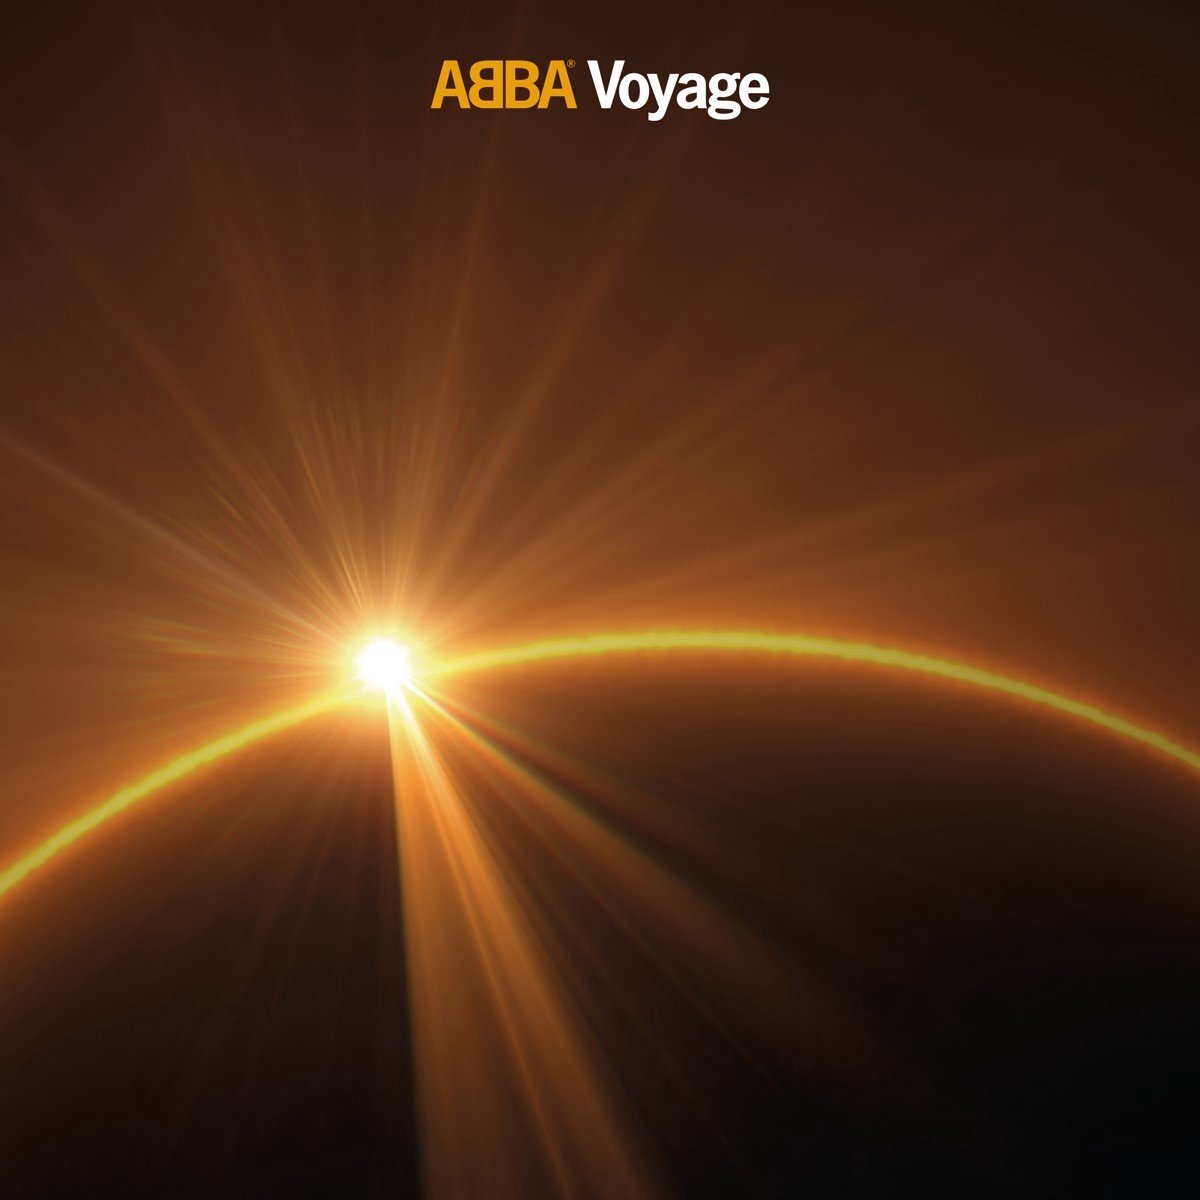 ABBA - Voyage (LP) (Limited Edition) - ABBA